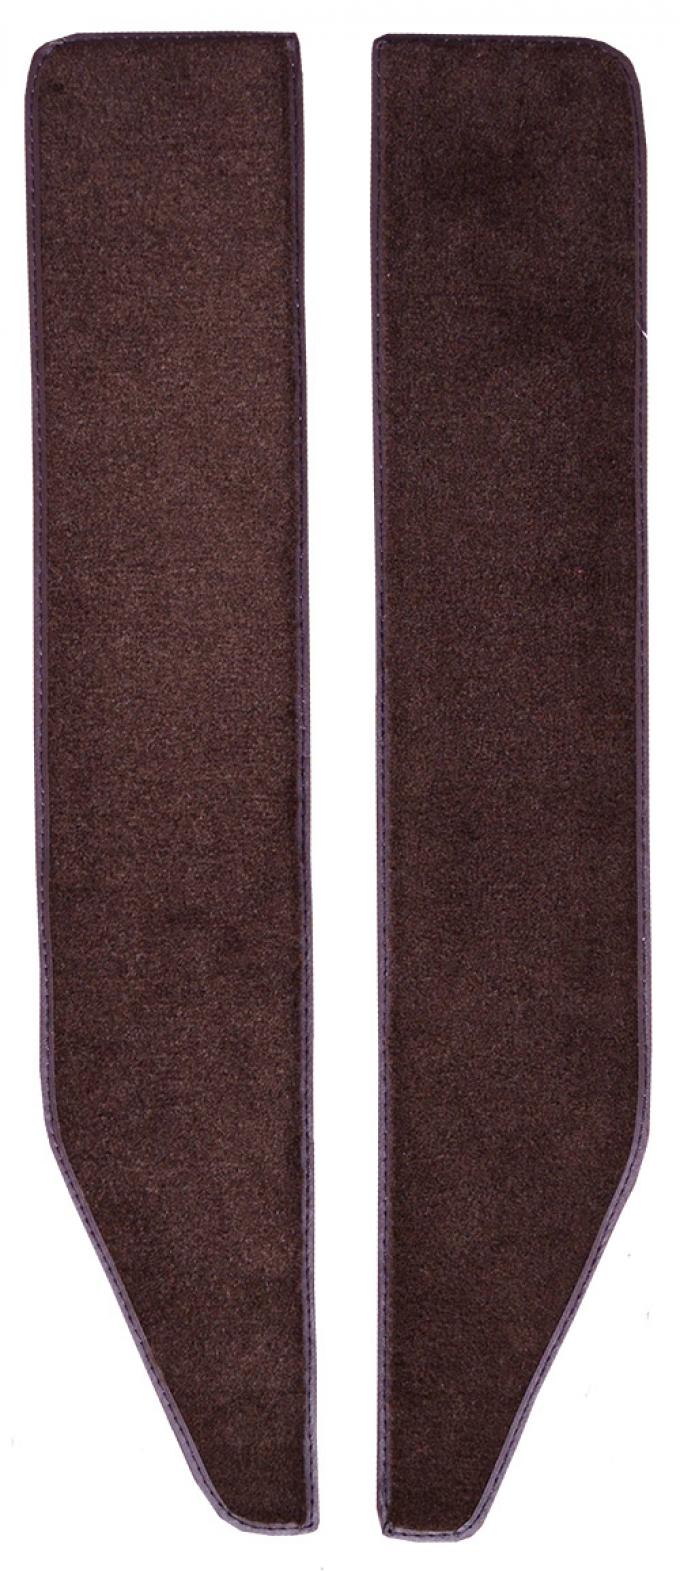 ACC 1975-1979 Ford F-250 Door Panel Inserts with Cardboard 2pc Cutpile Carpet